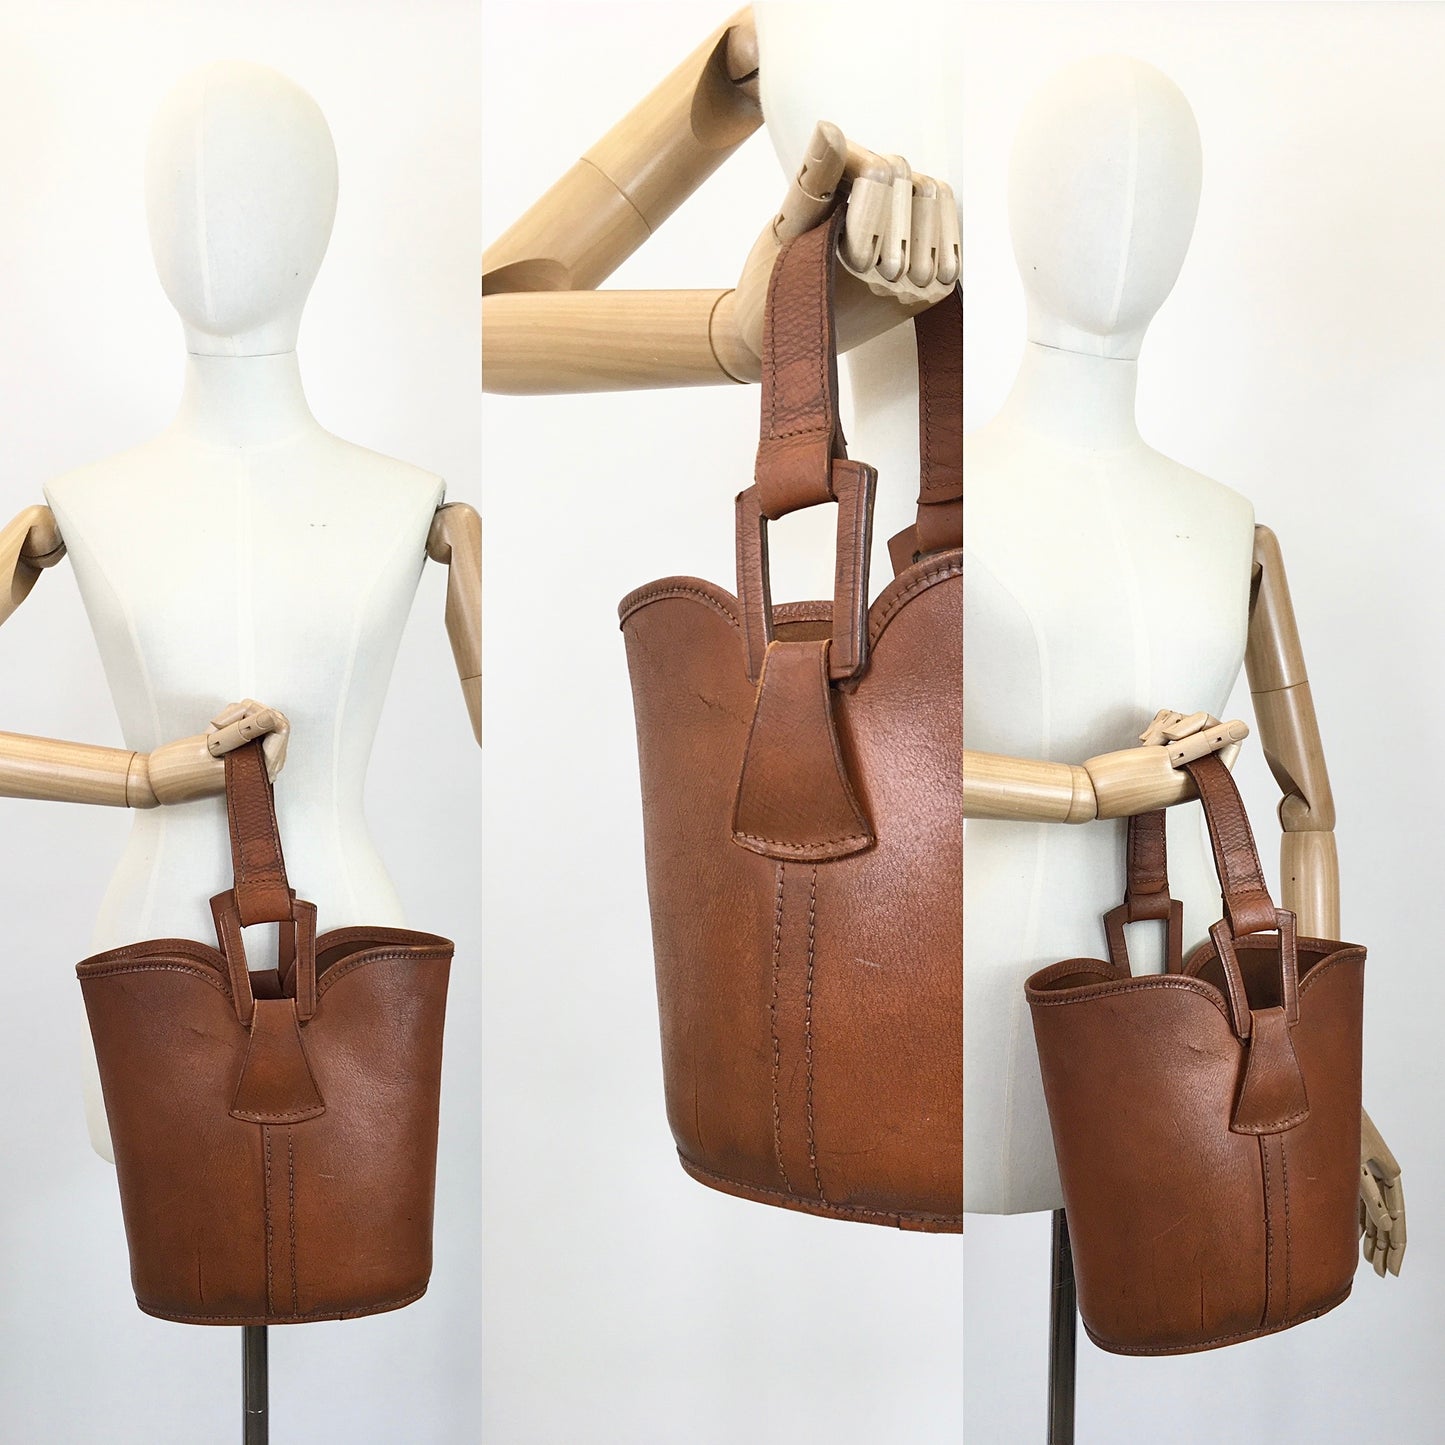 Original 1940's Fabulous Leather Bucket Bag - In A Lovely Warm Tan